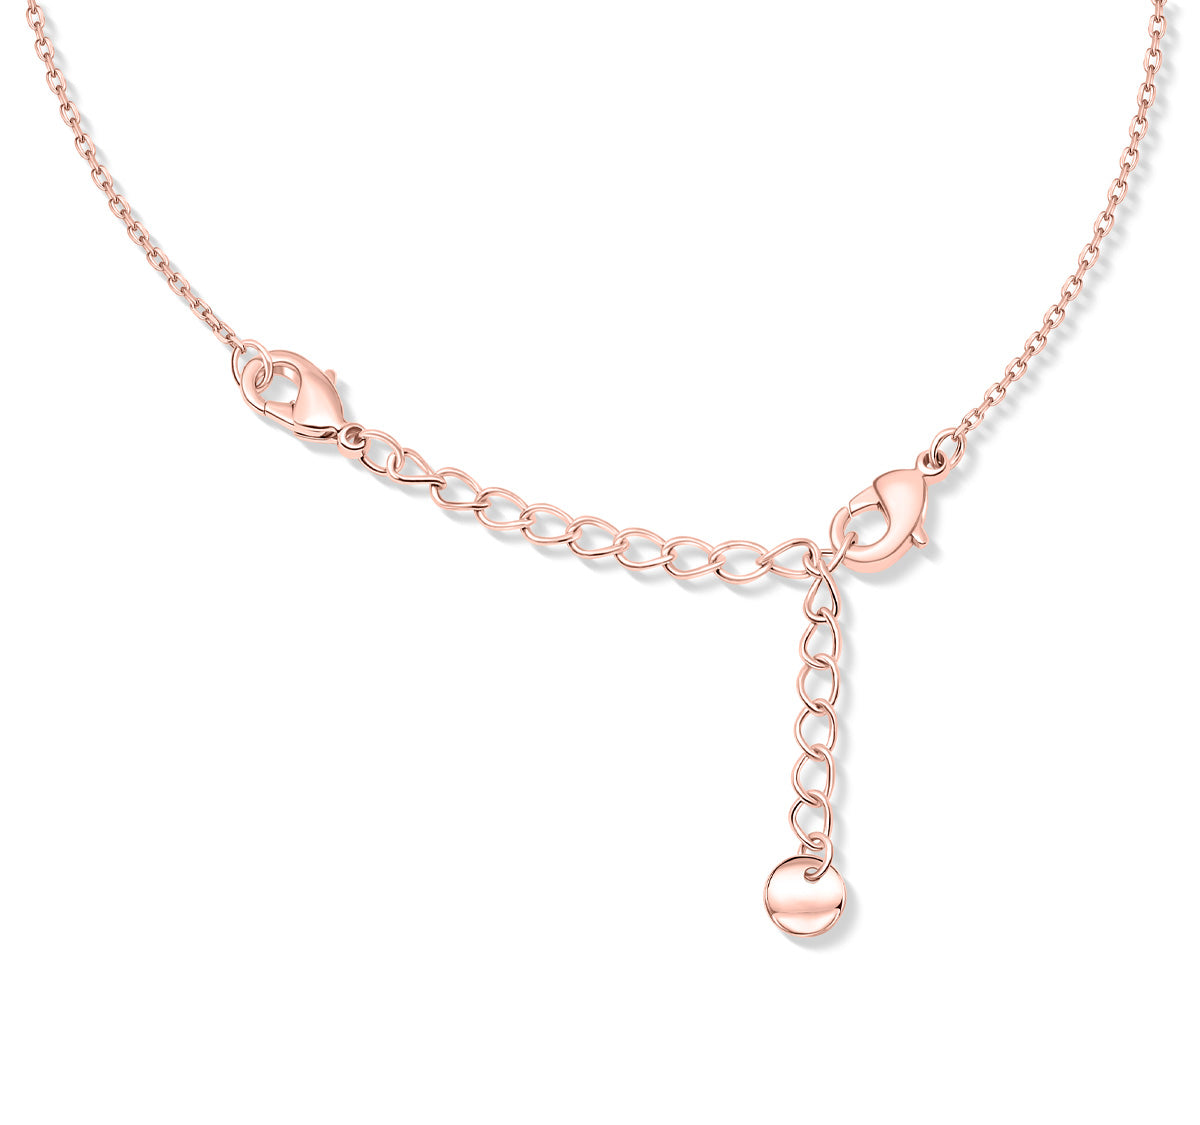 Rose gold necklace extender chain